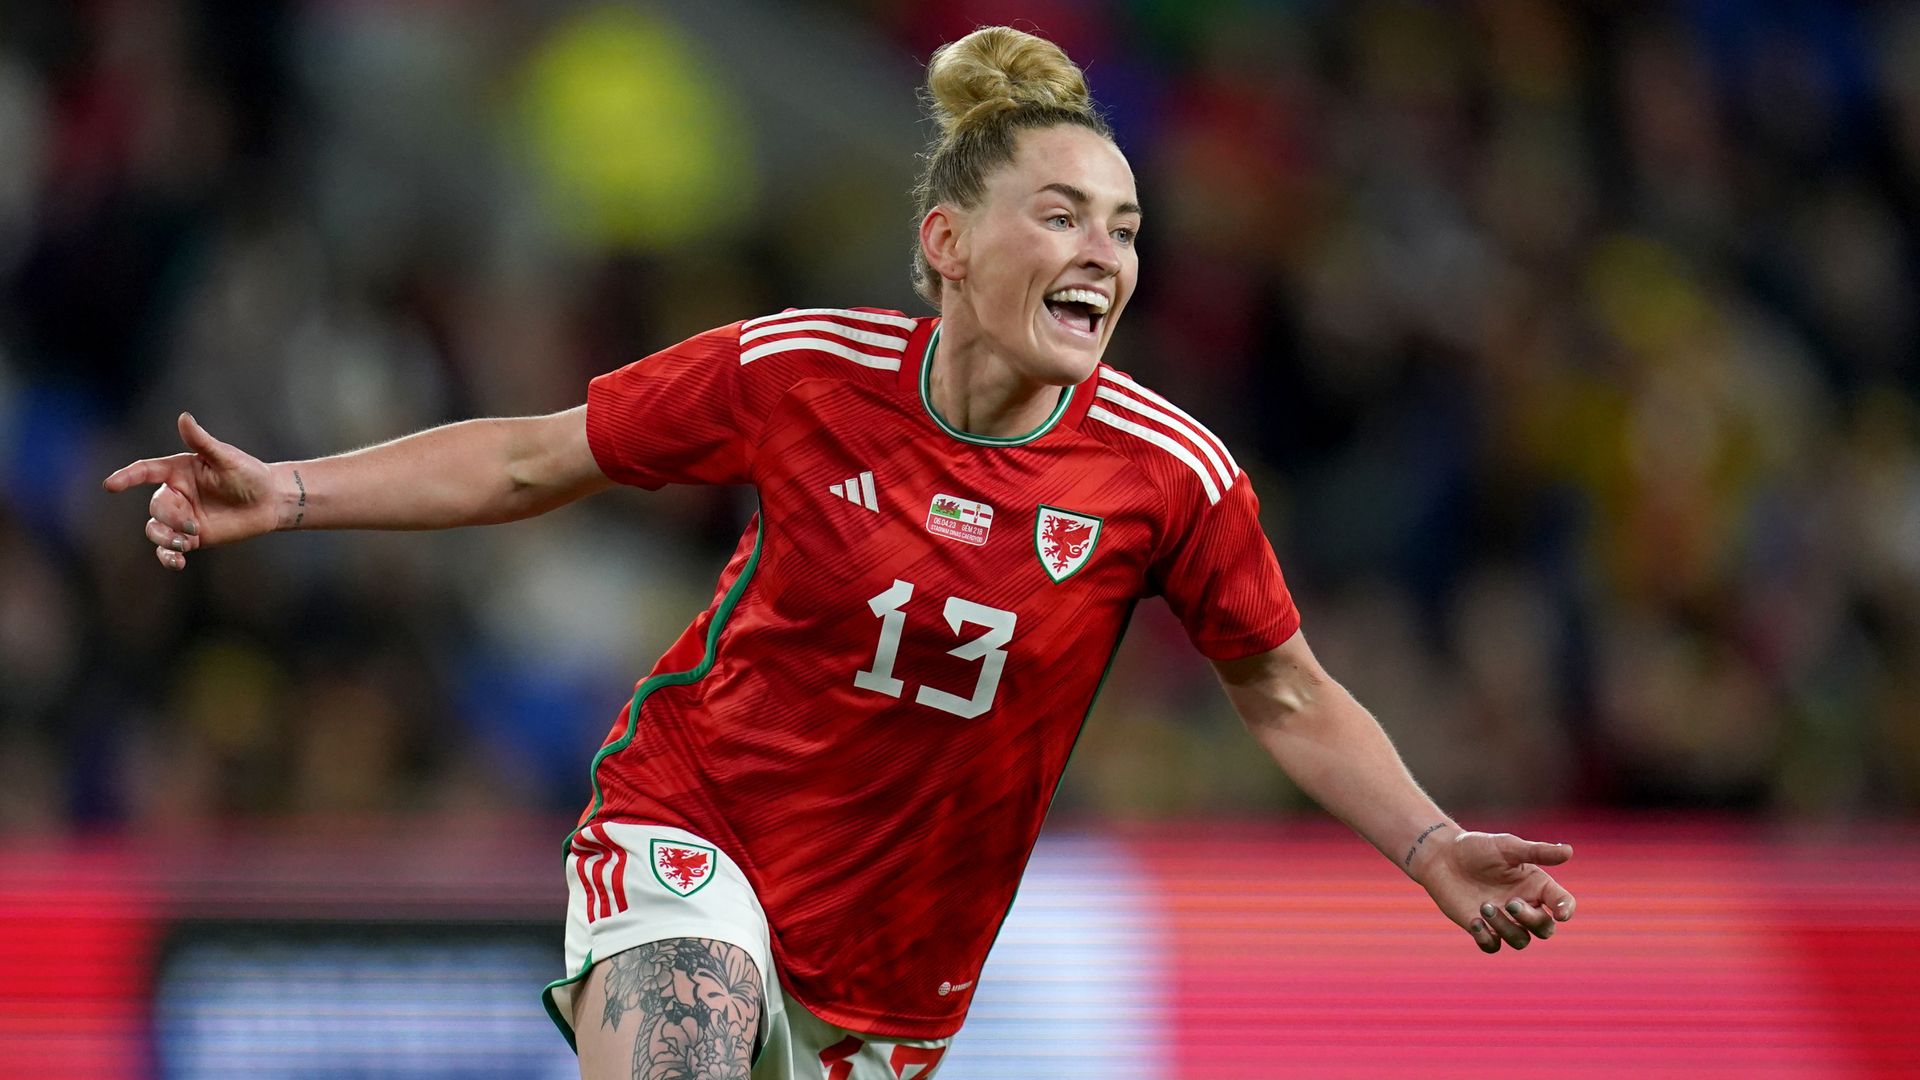 Rowe on target as Wales Women draw with Portugal